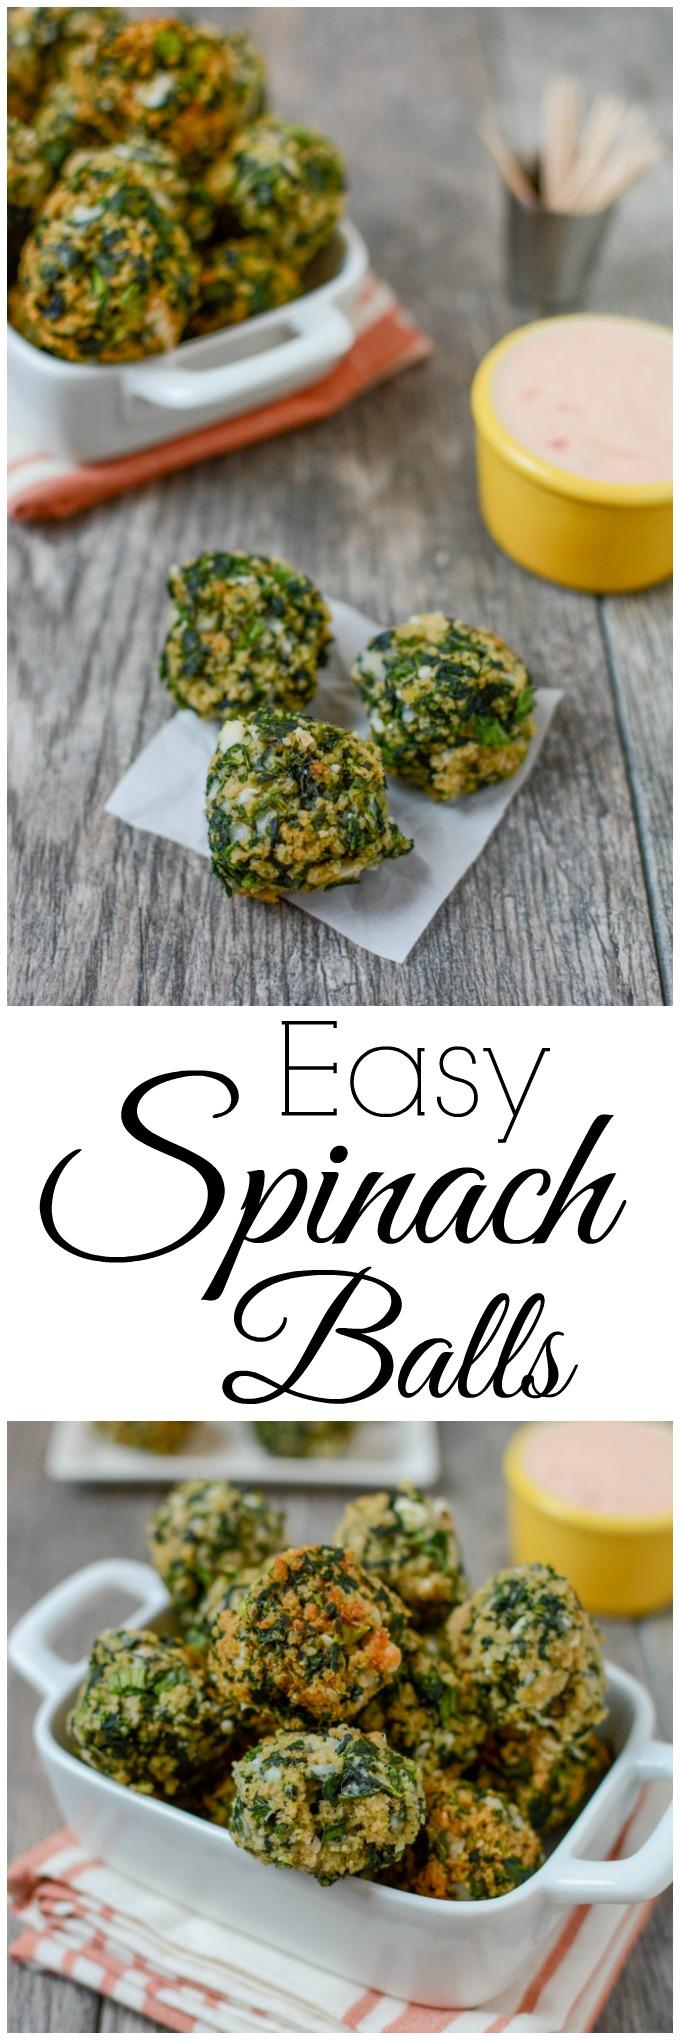 These Easy Spinach Balls are a perfect party appetizer. Prep the recipe ahead of time for easy entertaining or serve them as a kid-friendly vegetable option at dinner!